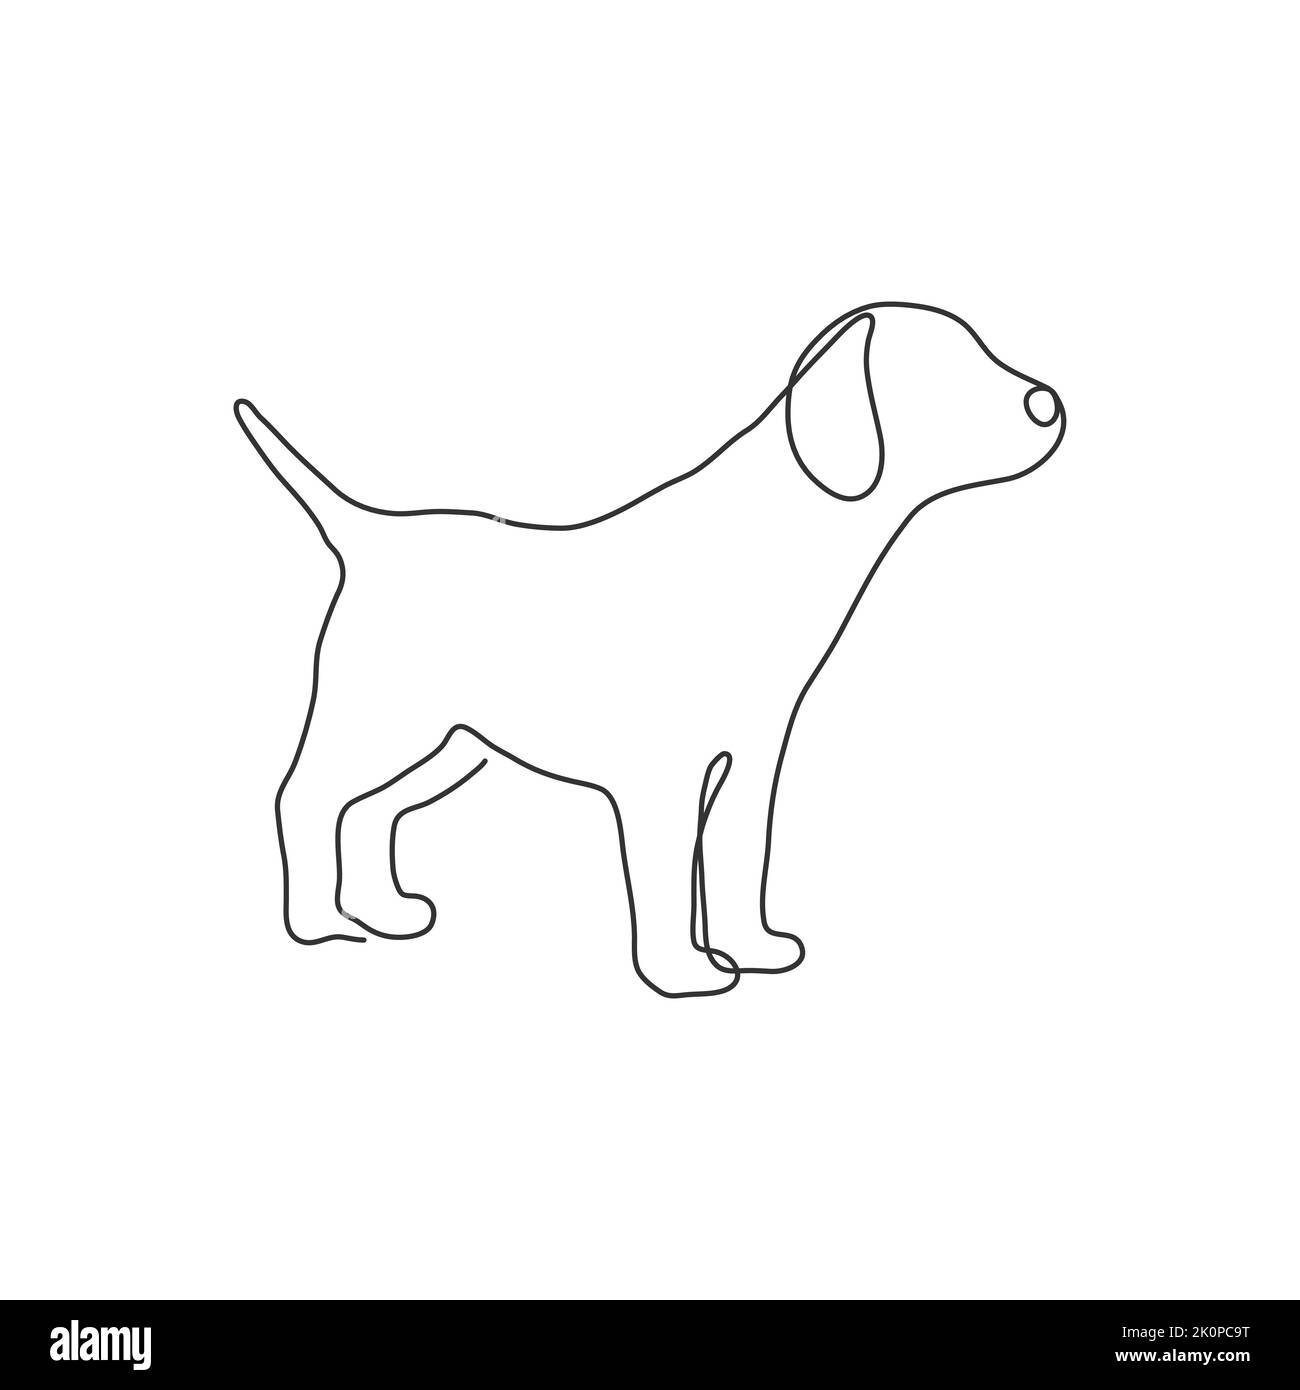 Puppy dog animal silhouette - continuous one simple single line. Linear vector. Stock Vector